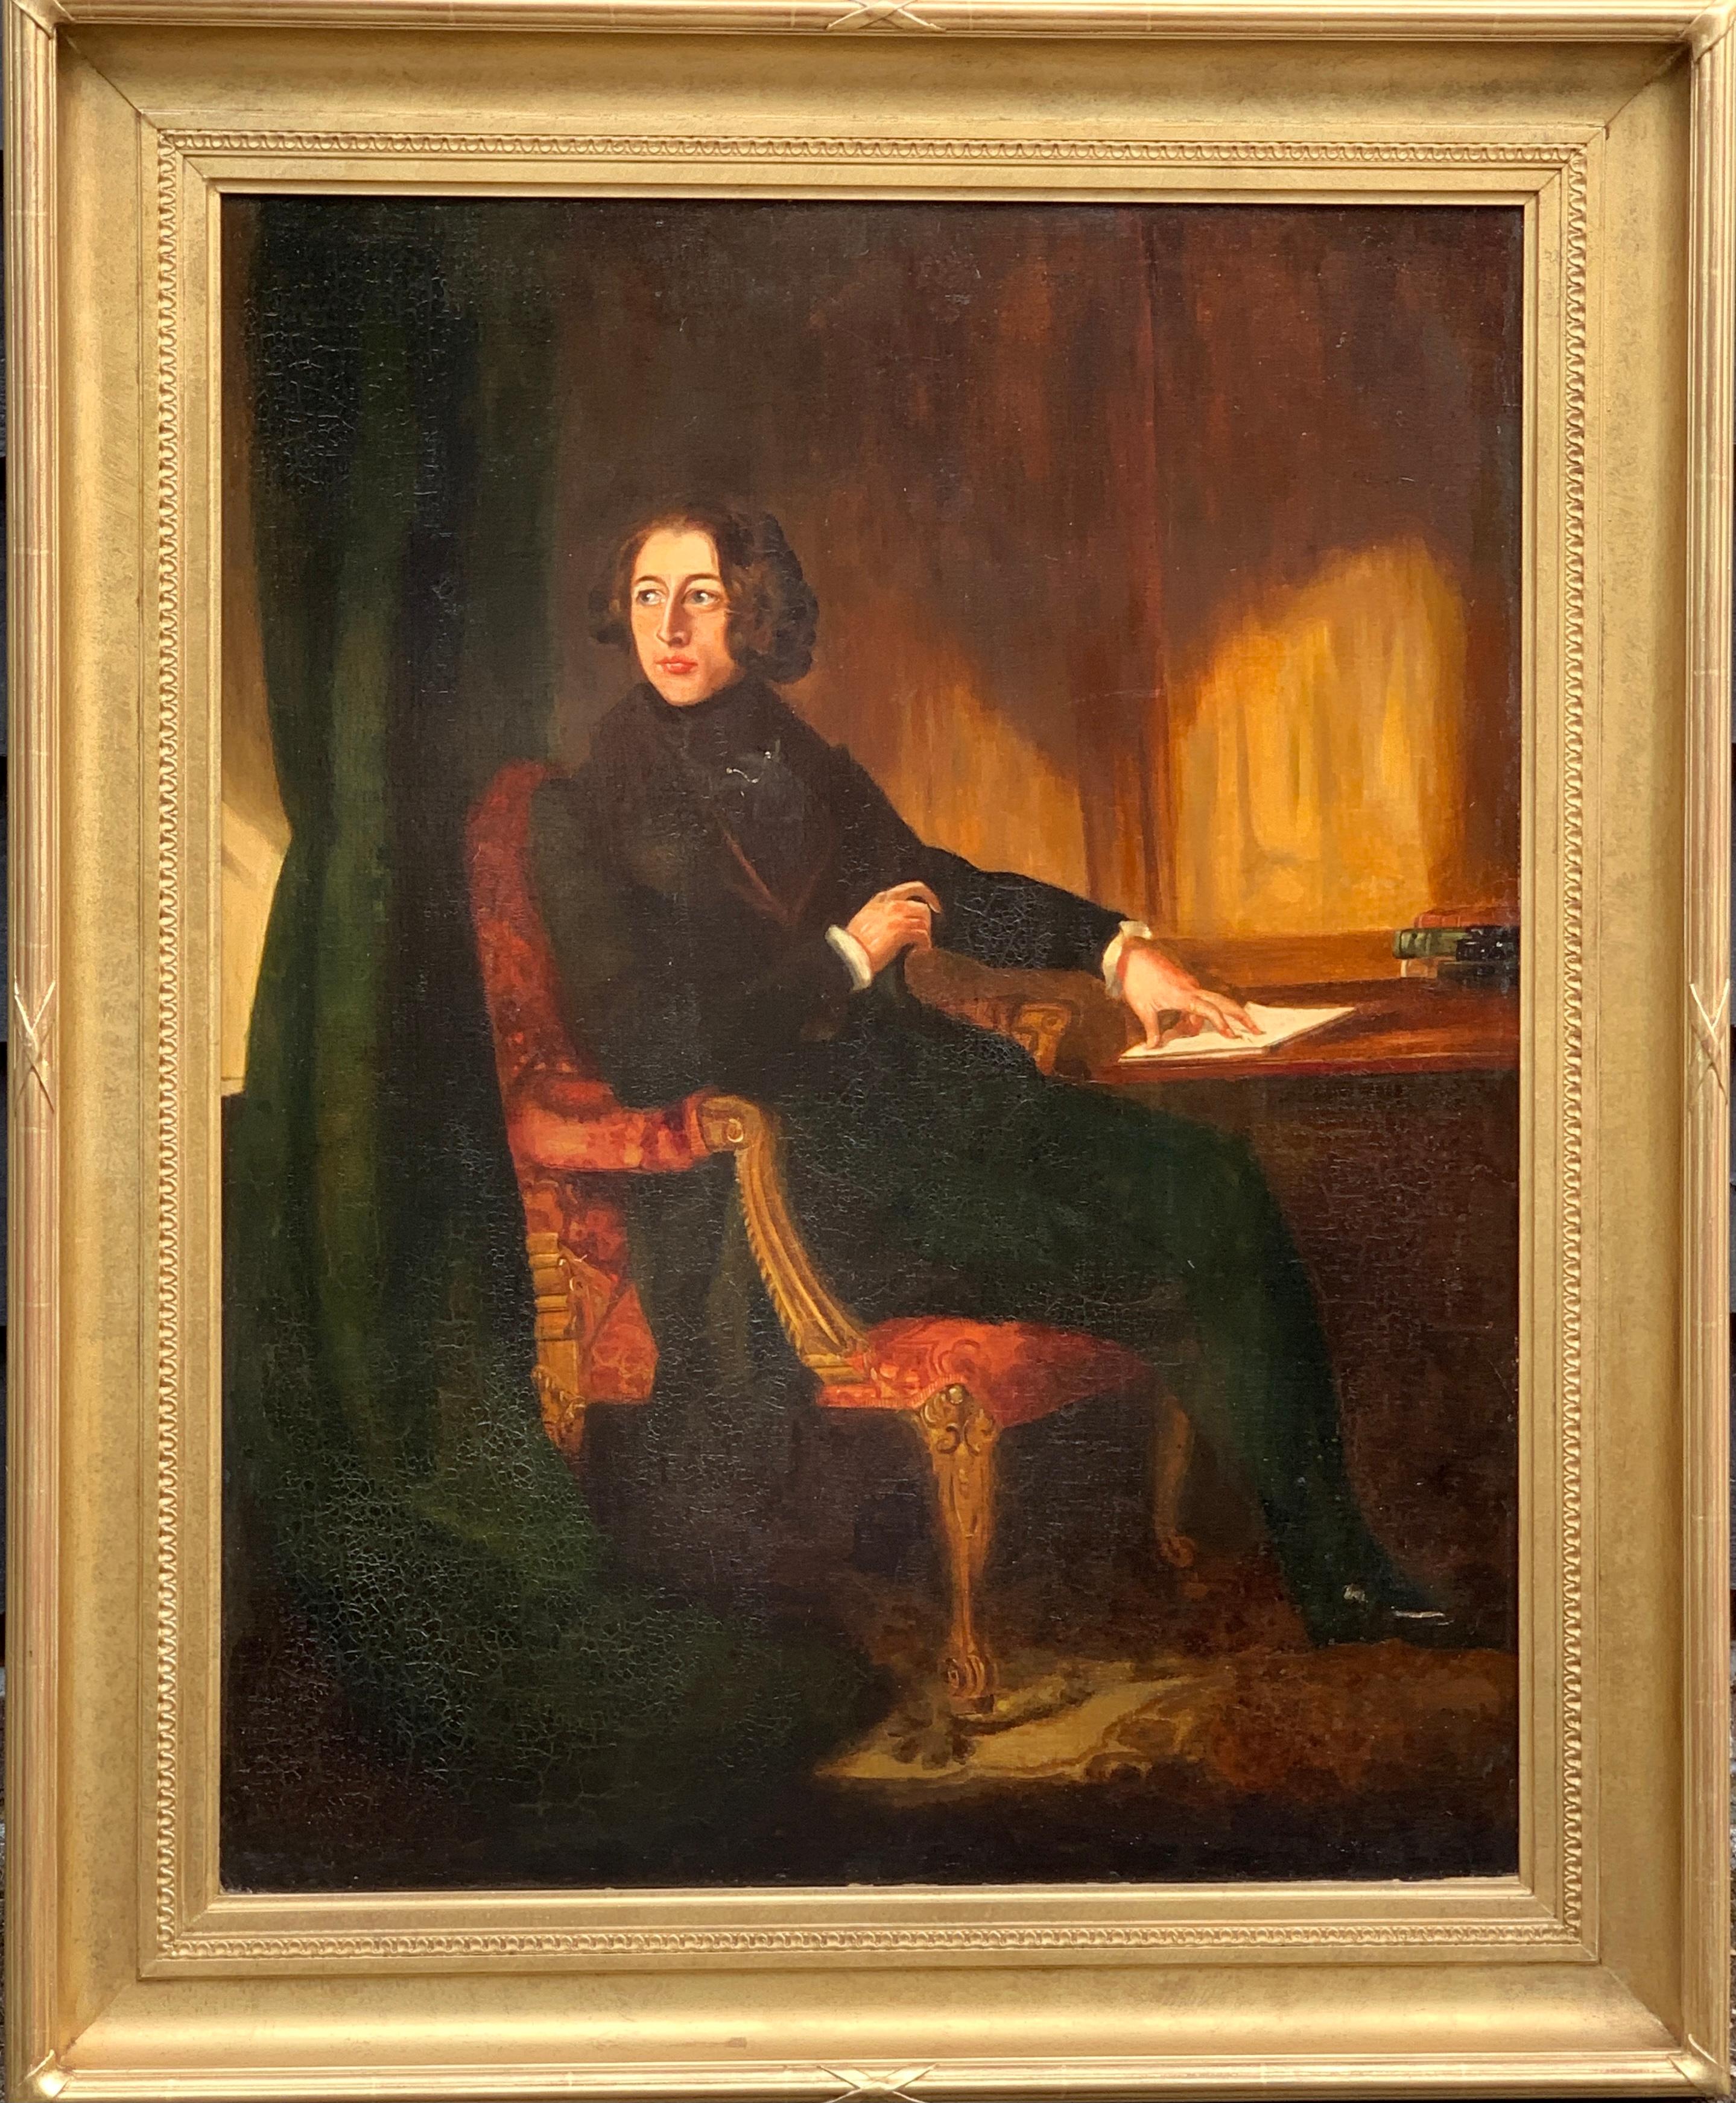 19th century British portrait of Sir Charles Dickens seated in an interior